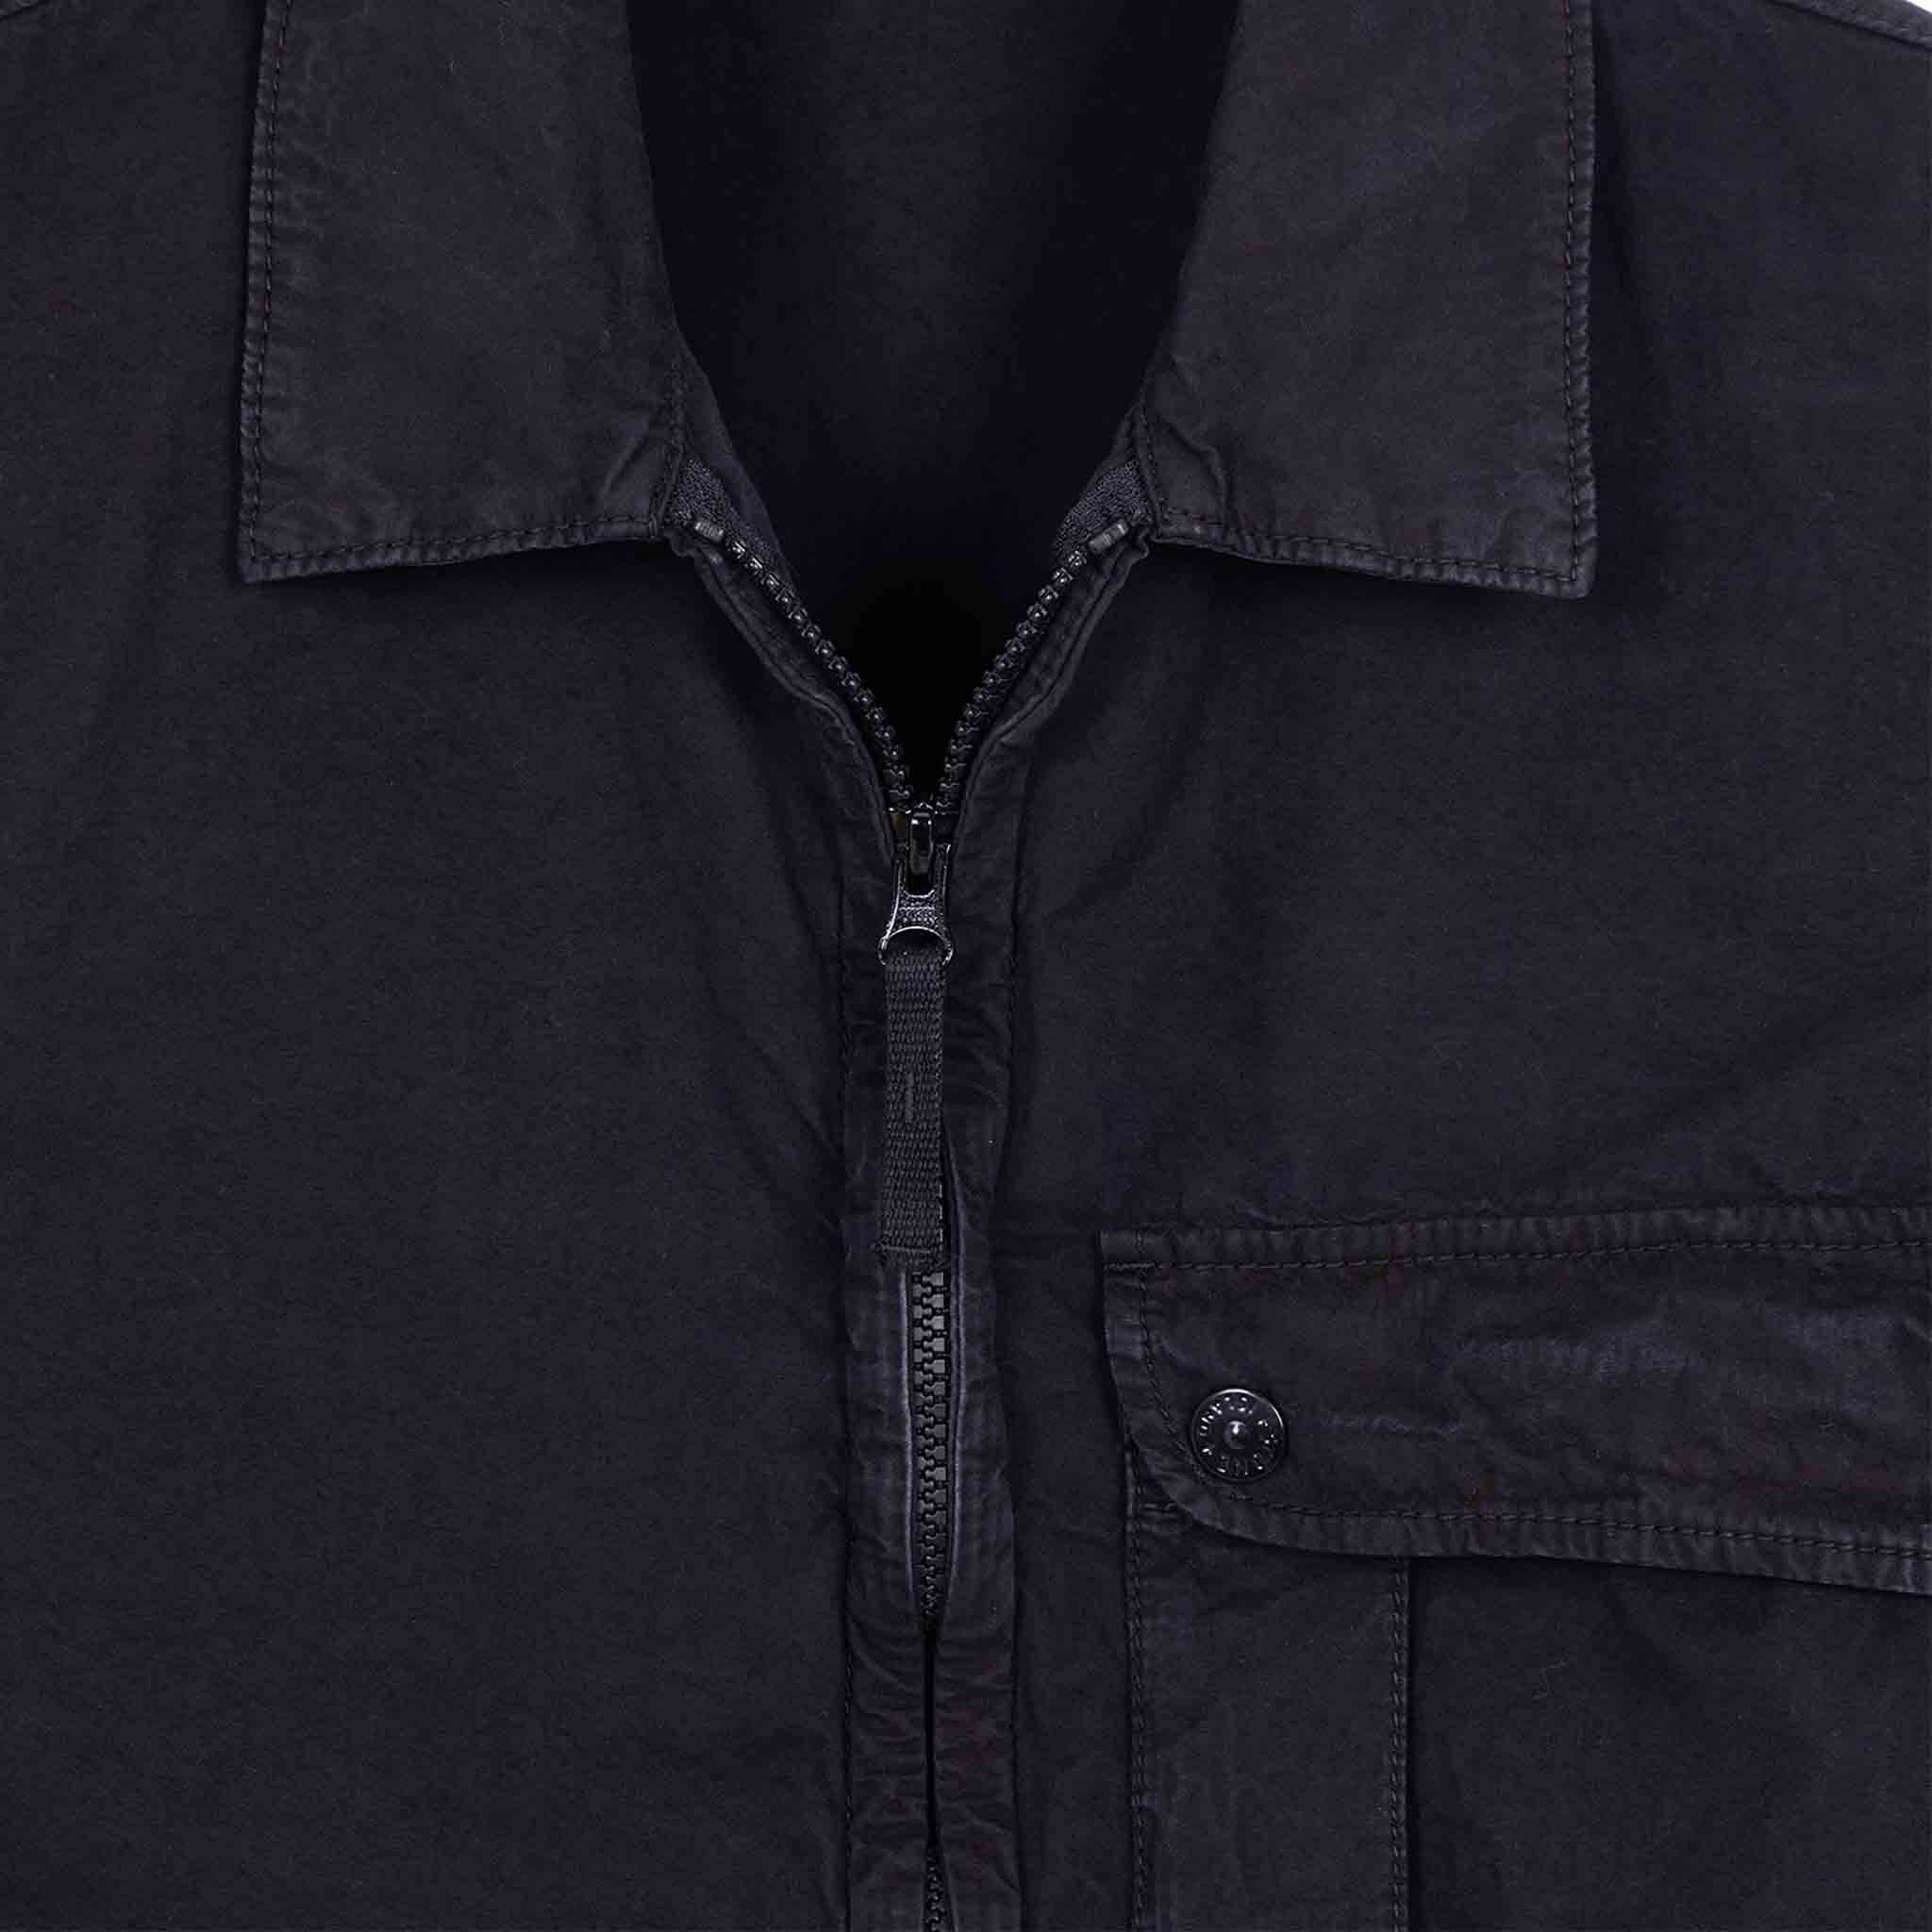 Stone Island 'Old Treatment' Regular Fit Overshirt in Navy